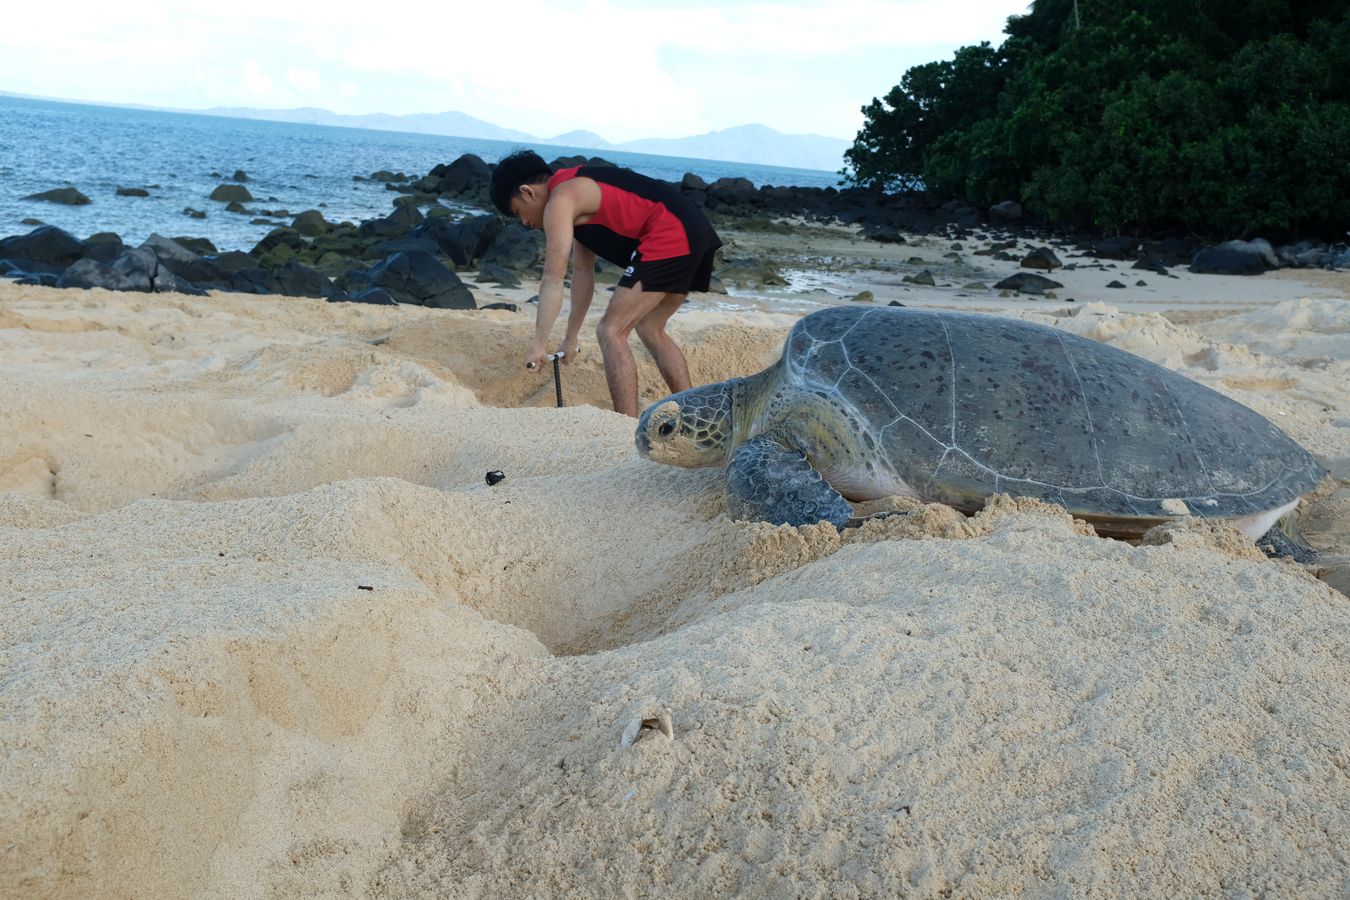 LPP controller Aidil uses the iron tool to pinpoint the exact location of the eggs, as a green turtle slowly makes its way back into the ocean after laying its eggs.